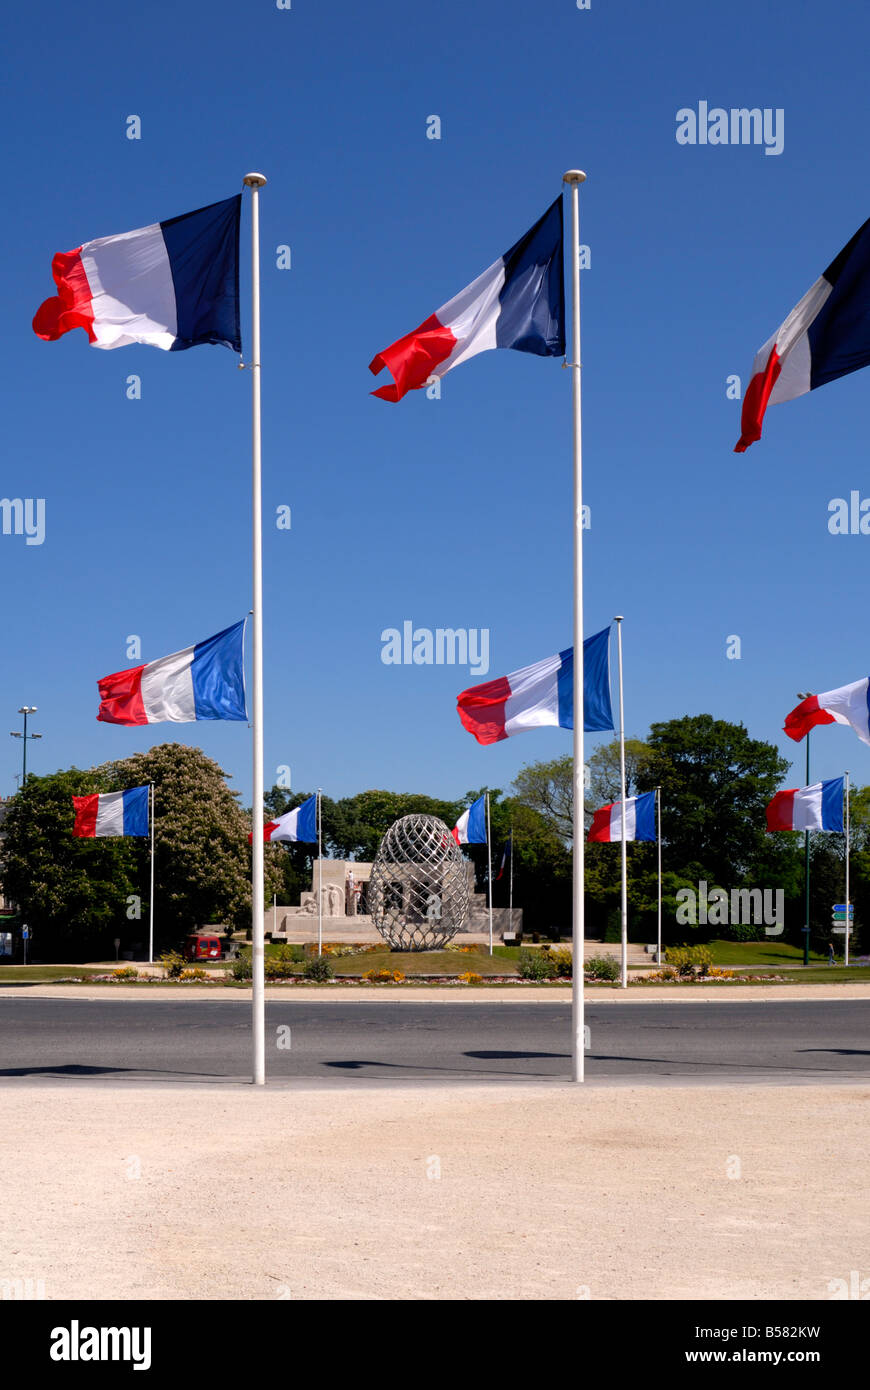 French flags and modern sculpture, Place de la Republique, Reims, Marne, Champagne-Ardenne, France, Europe Stock Photo